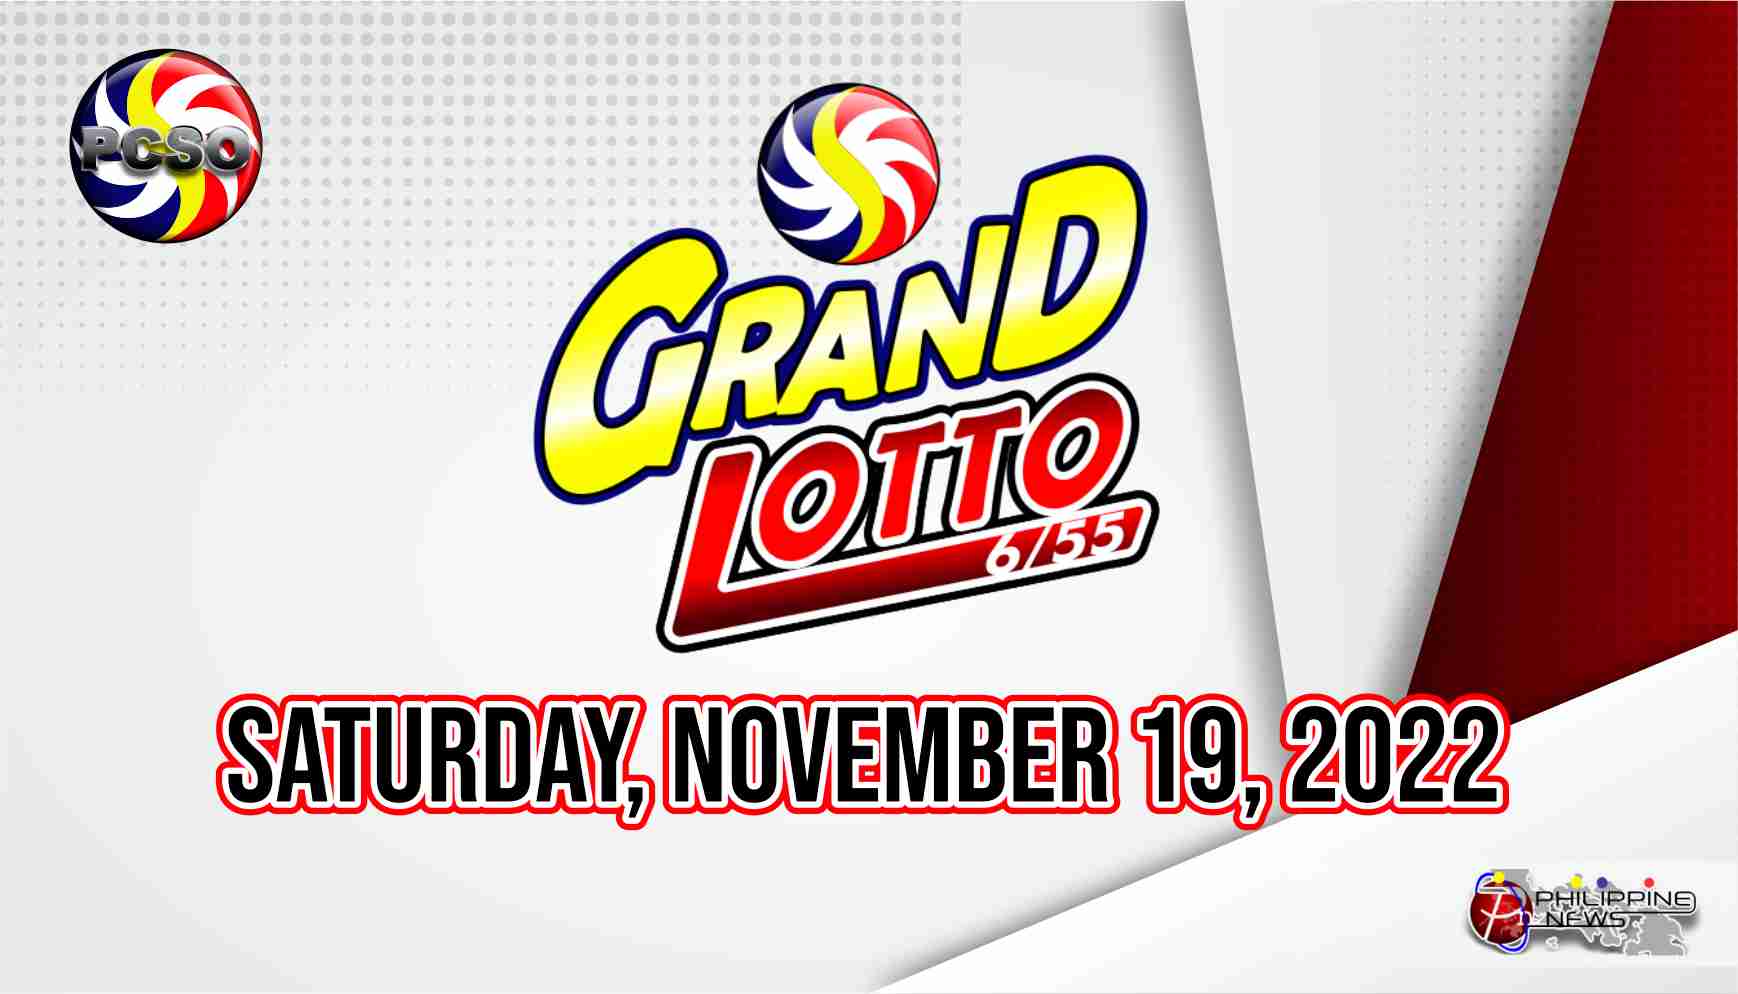 6/55 LOTTO RESULT Today, Saturday, November 19, 2022 Official PCSO